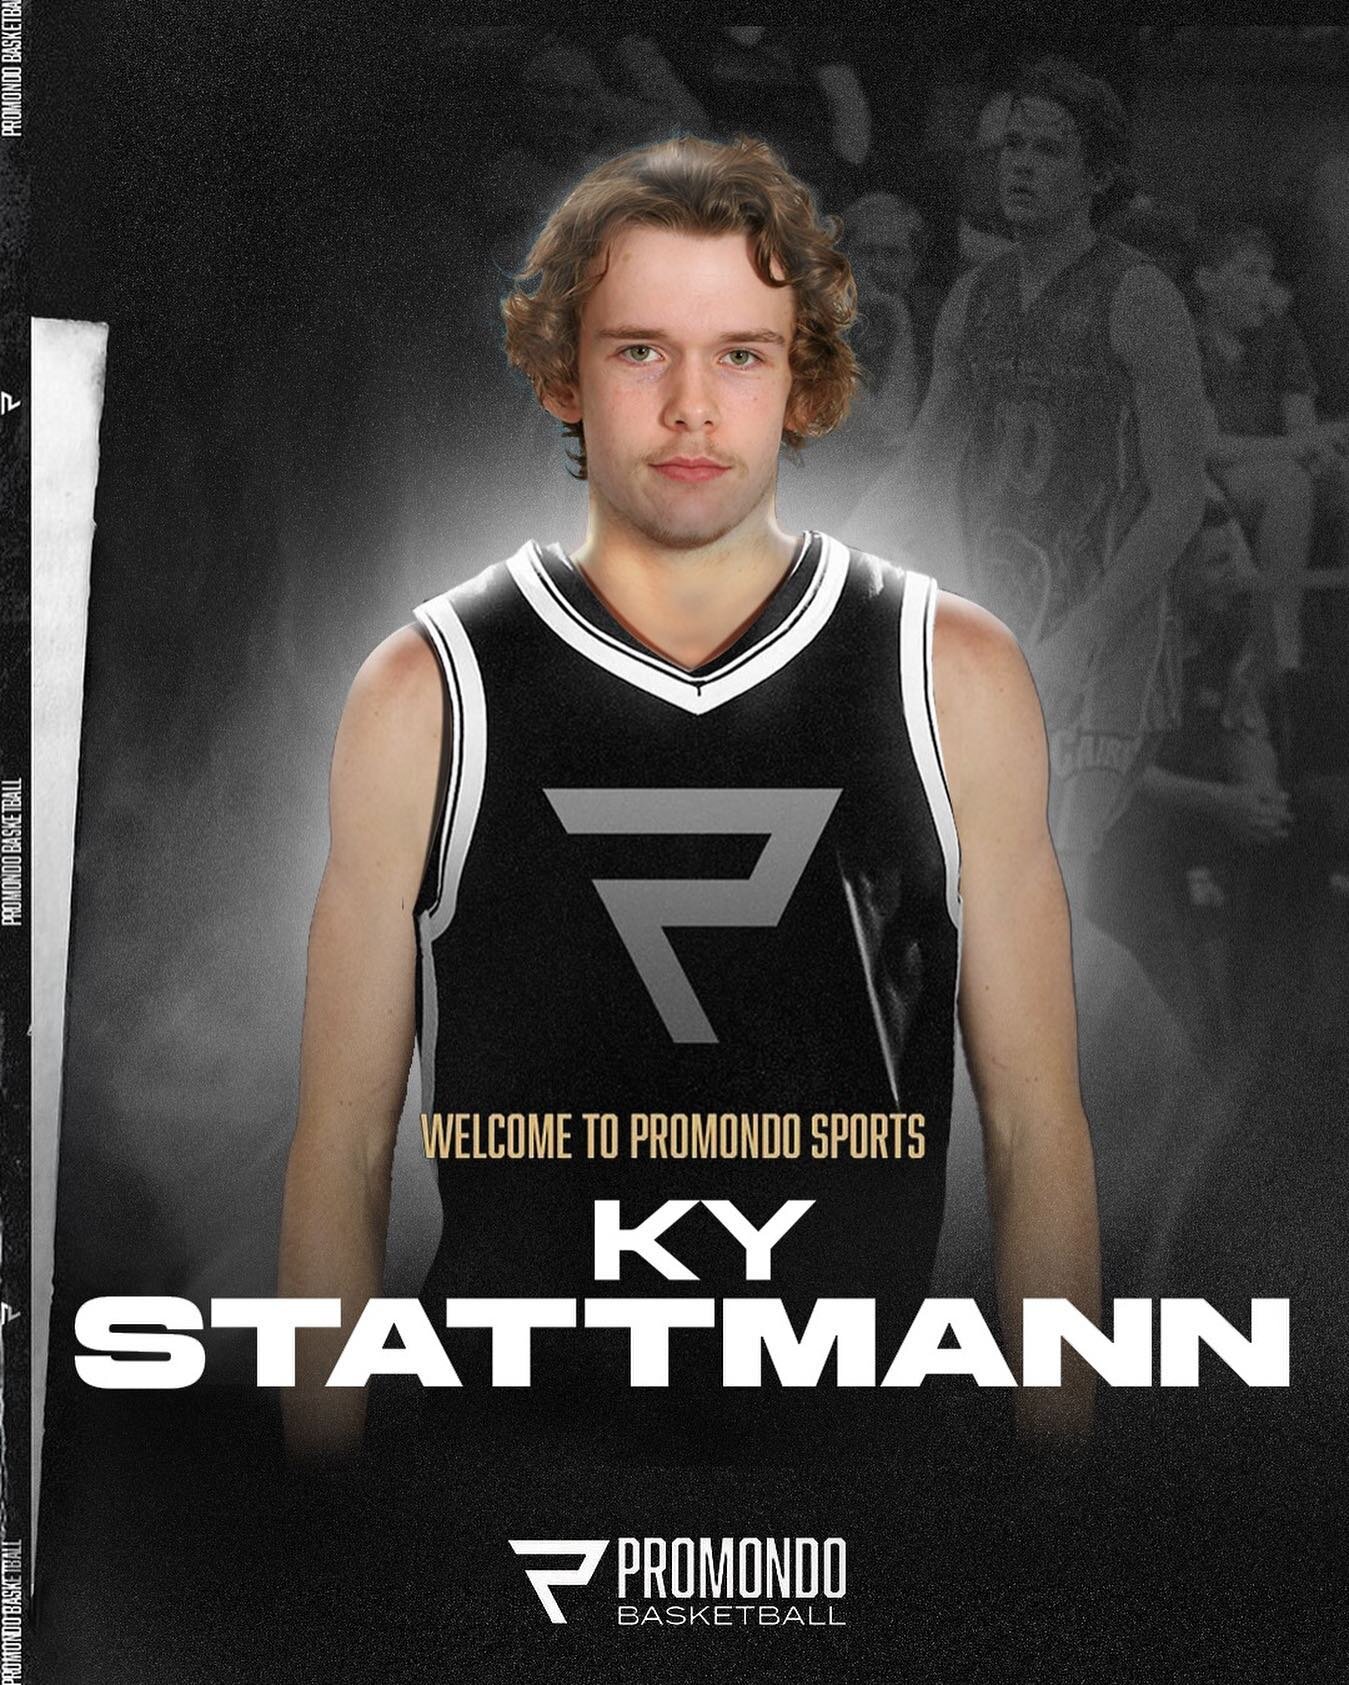 Excited to have @kystattmann join the team @promondo_sports 
A very exciting future in the game. Welcome Ky!